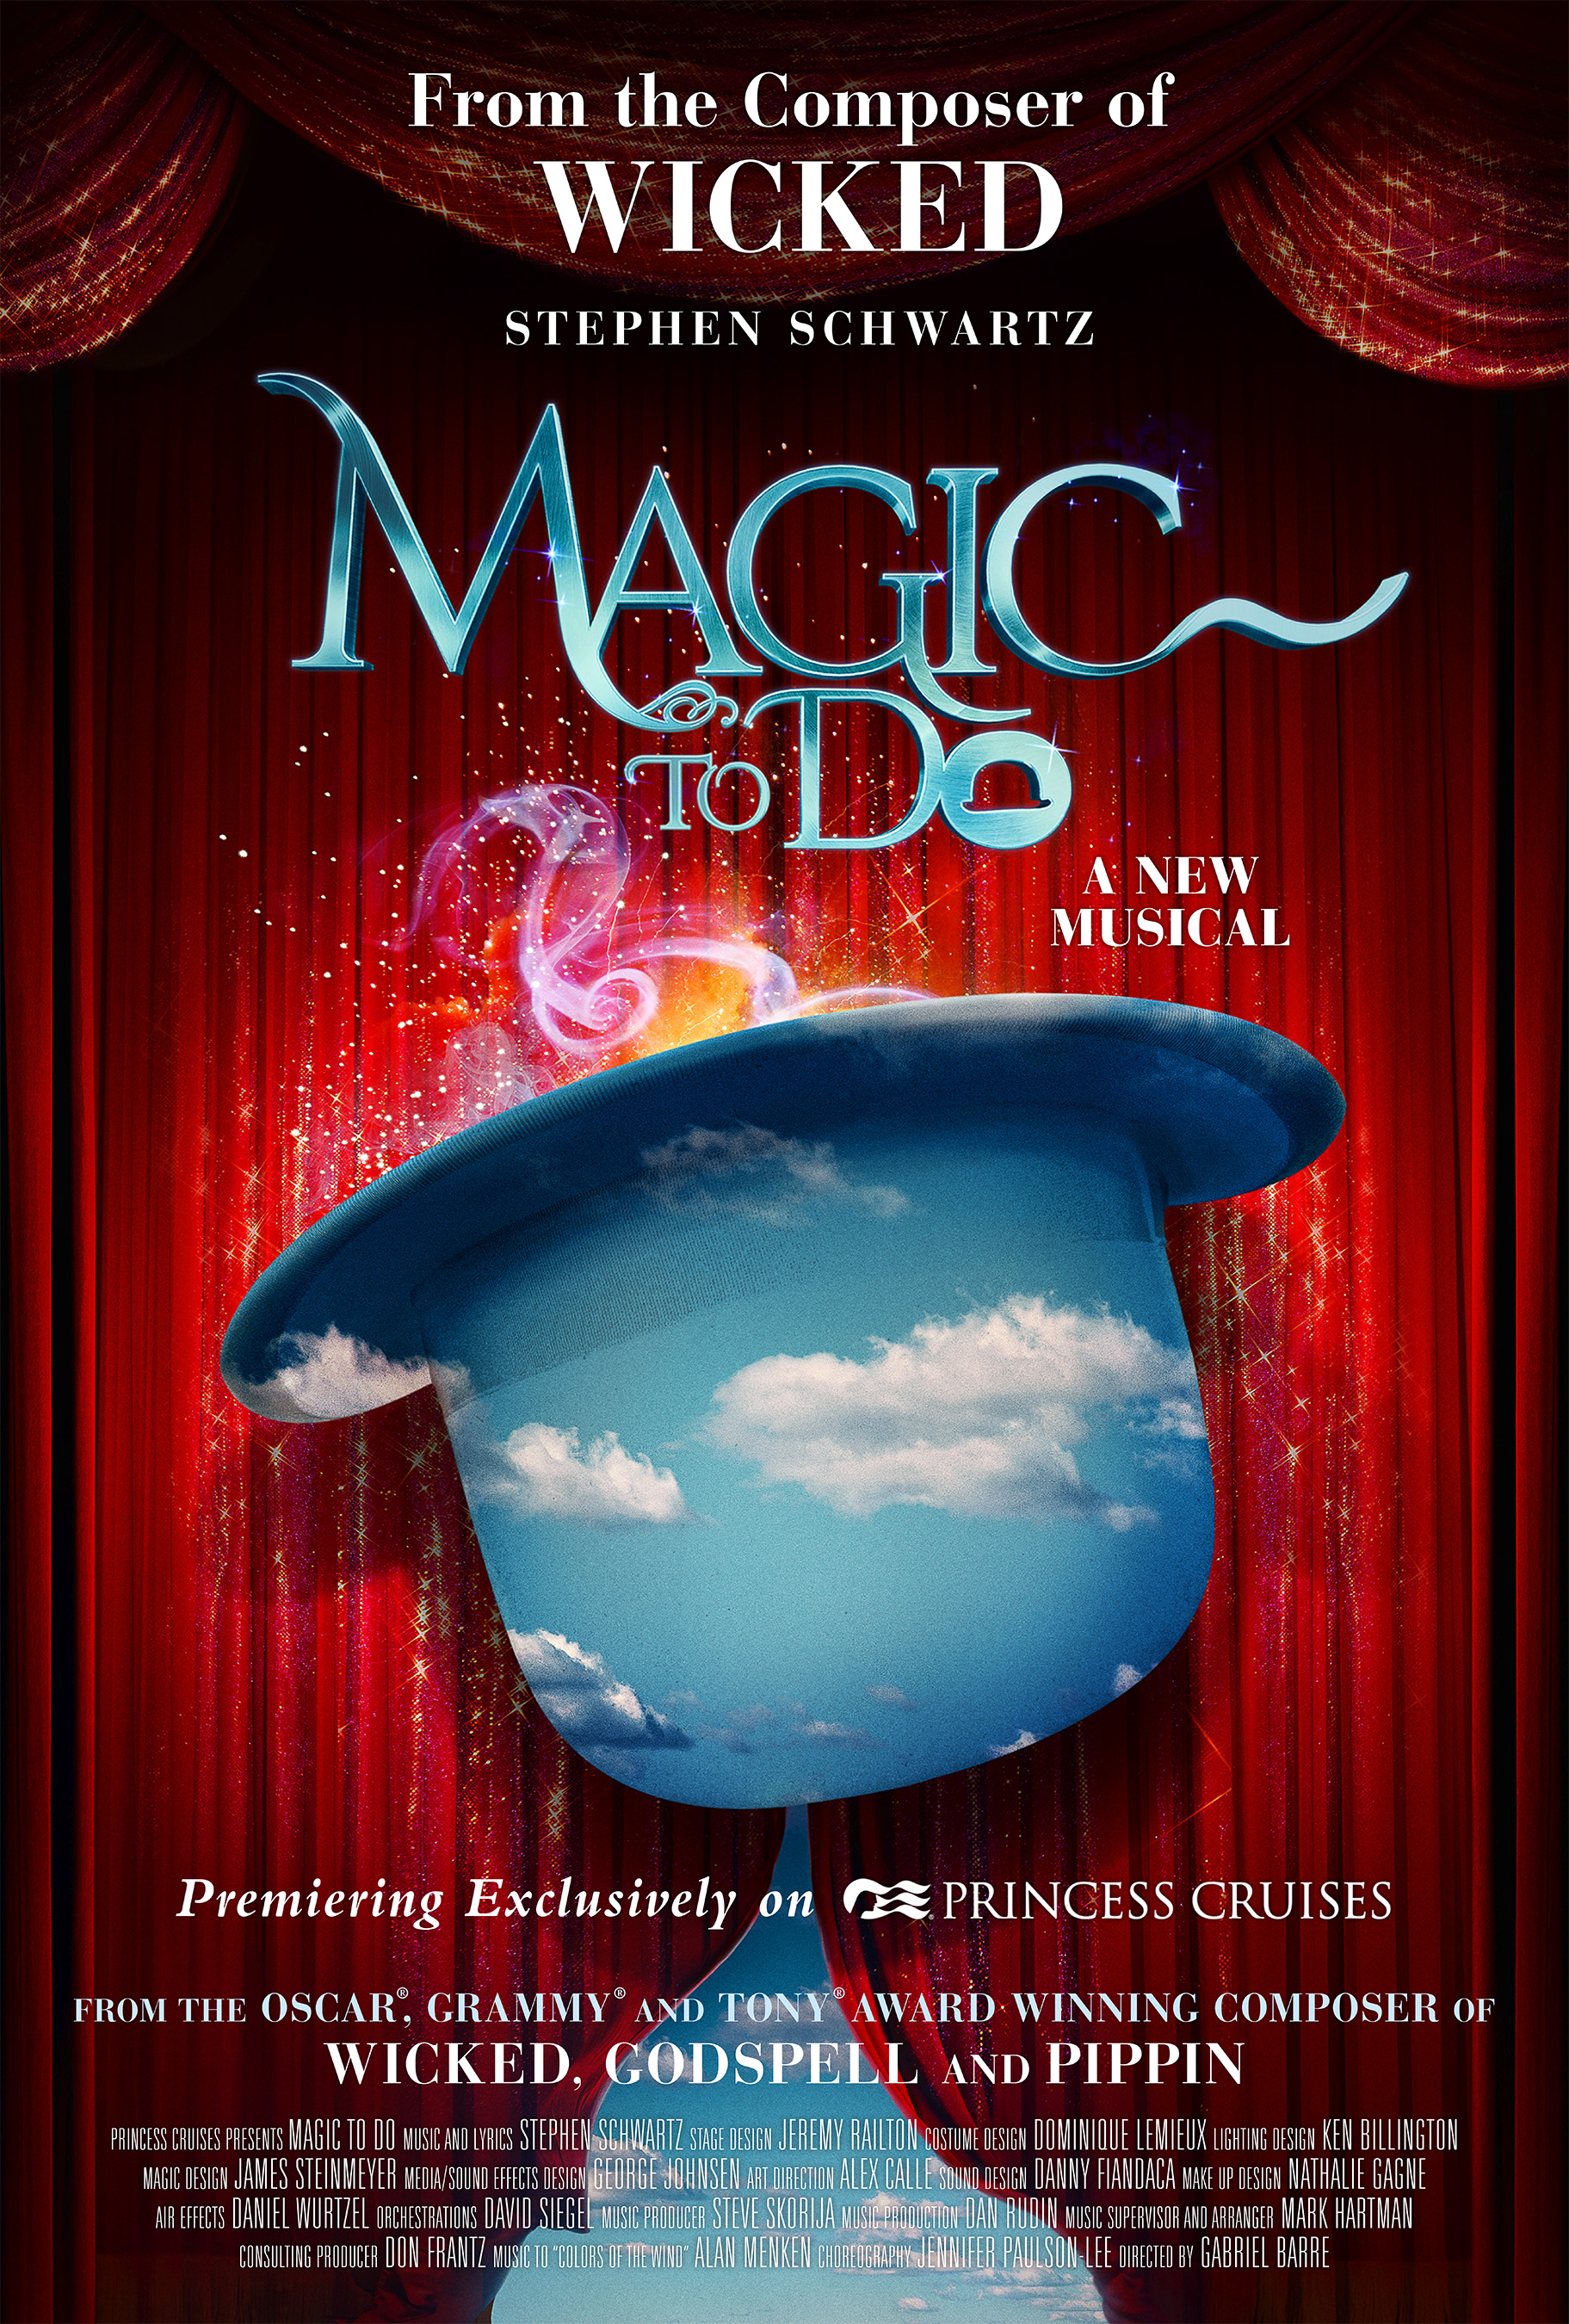 Princess Cruises Premieres Magic to Do from Award-Winning Composer of Wicked Stephen Schwartz 